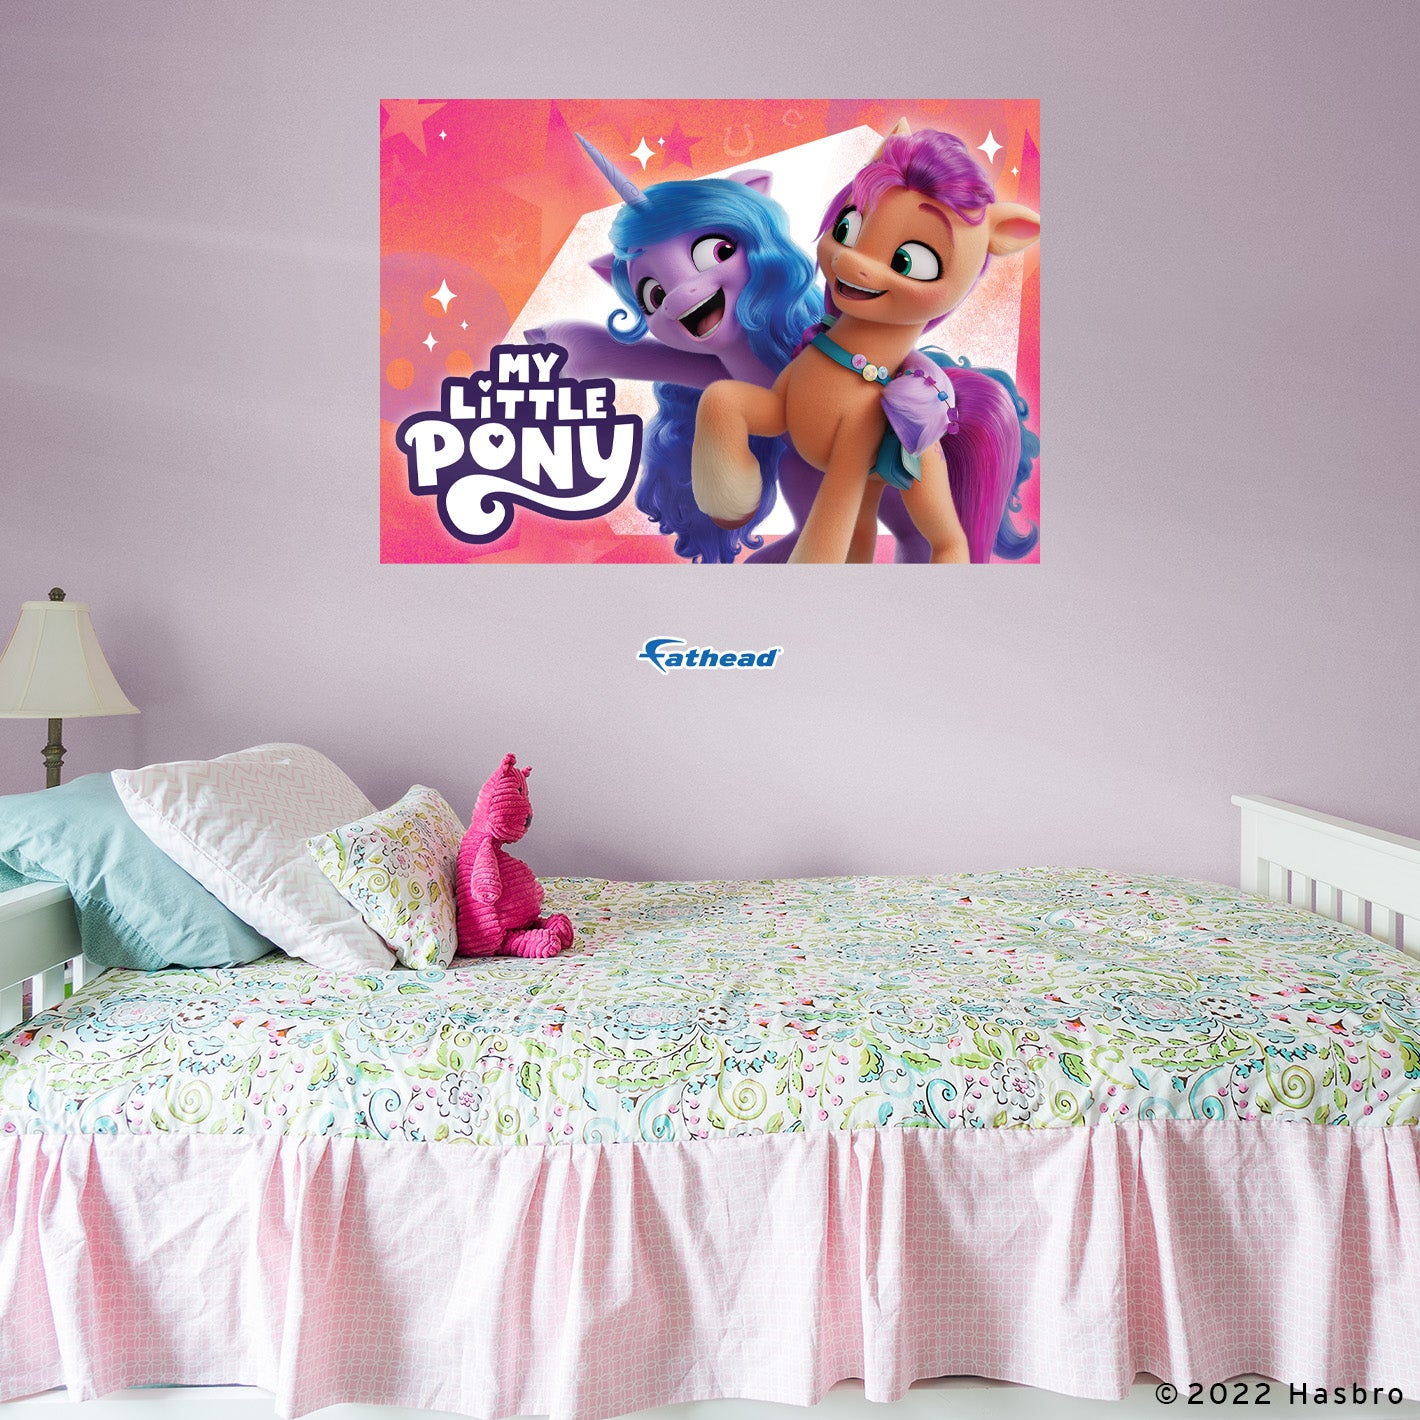 My Little Pony Movie 2: Friends Poster - Officially Licensed Hasbro Removable Adhesive Decal